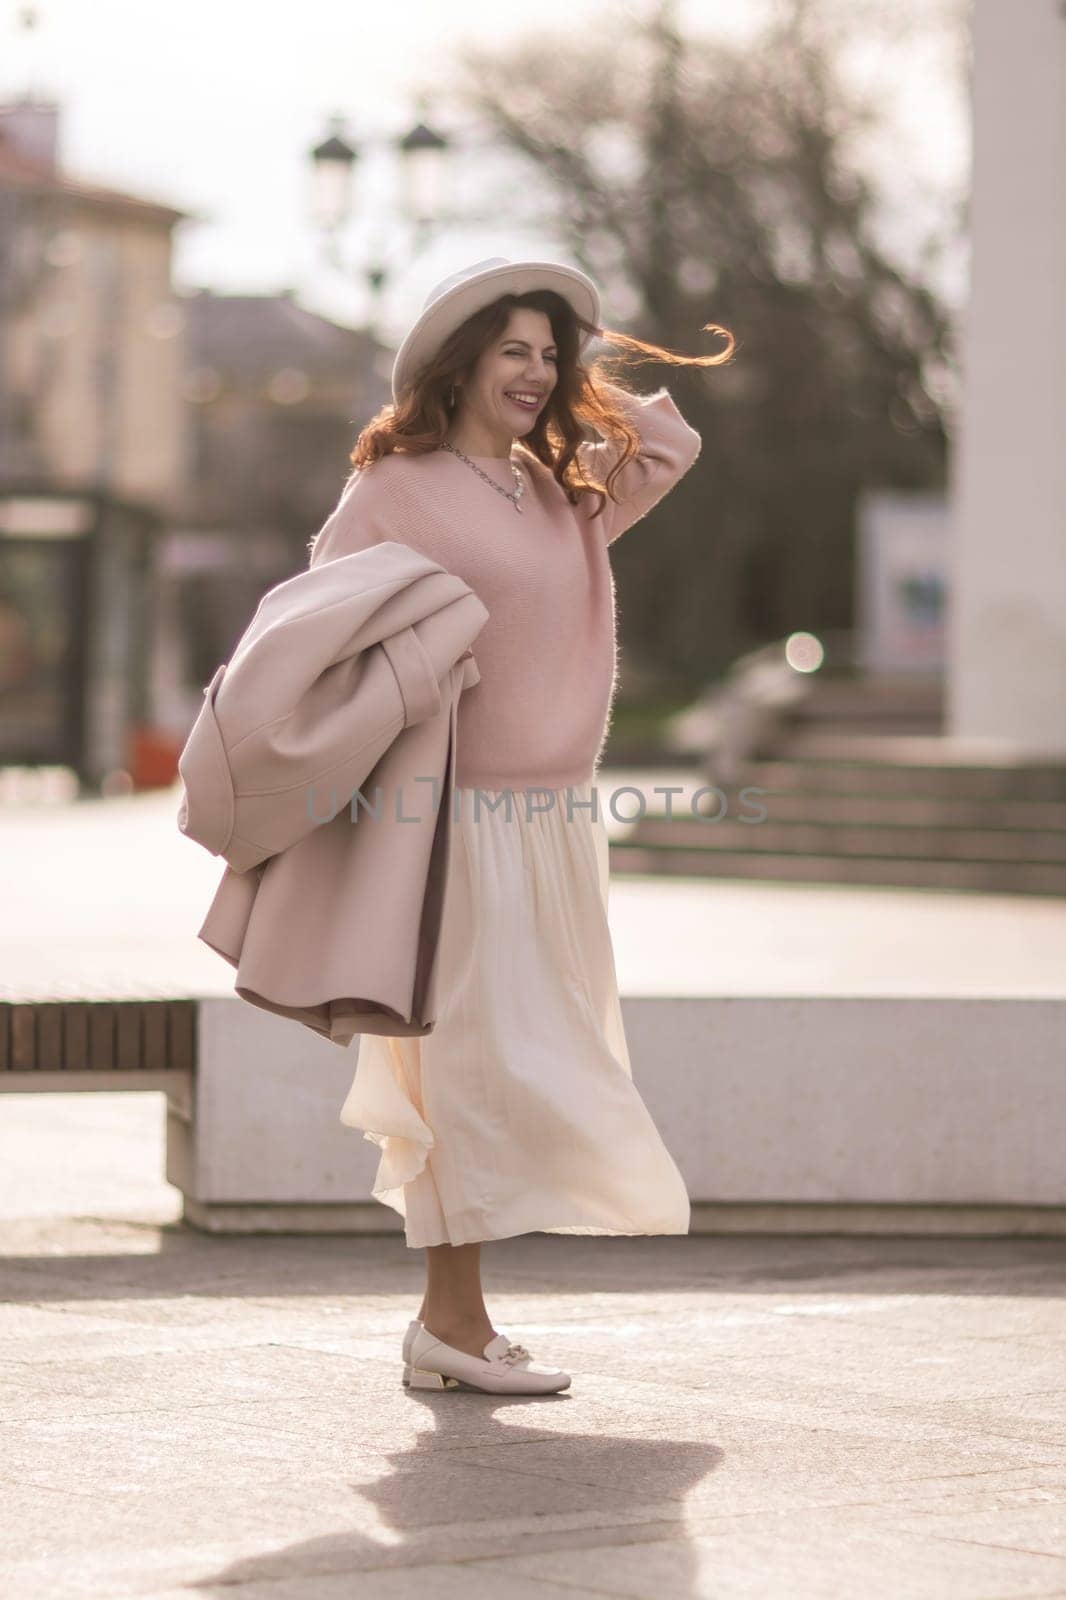 A woman wearing a pink sweater and white skirt is smiling and holding a brown bag. The scene has a warm and cheerful mood, with the woman looking happy and confident